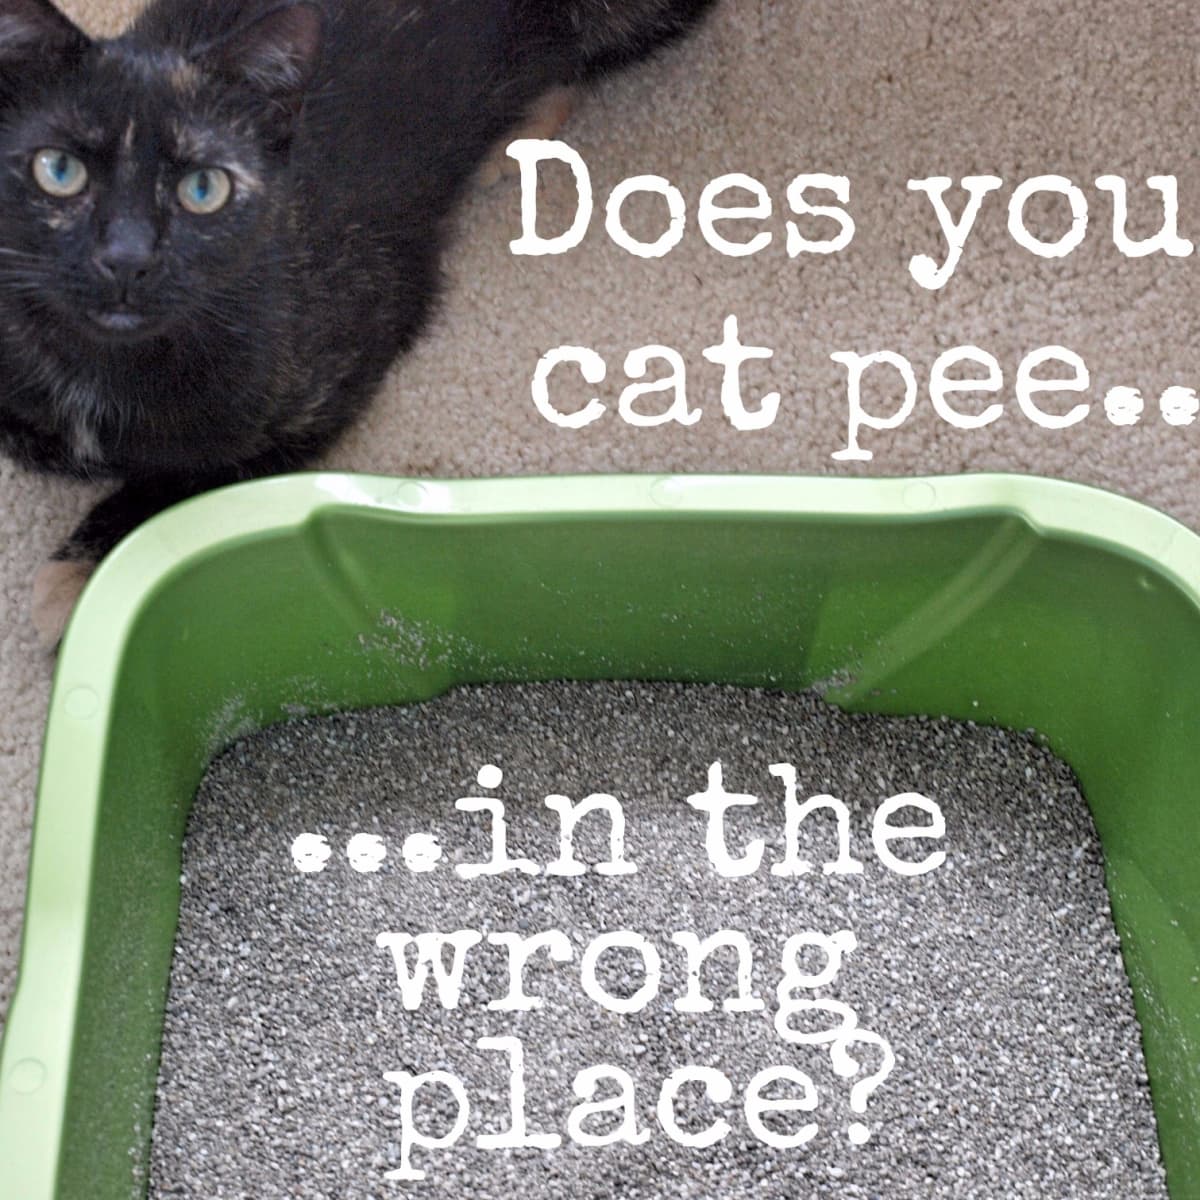 why does cat pee smell worse than dog pee